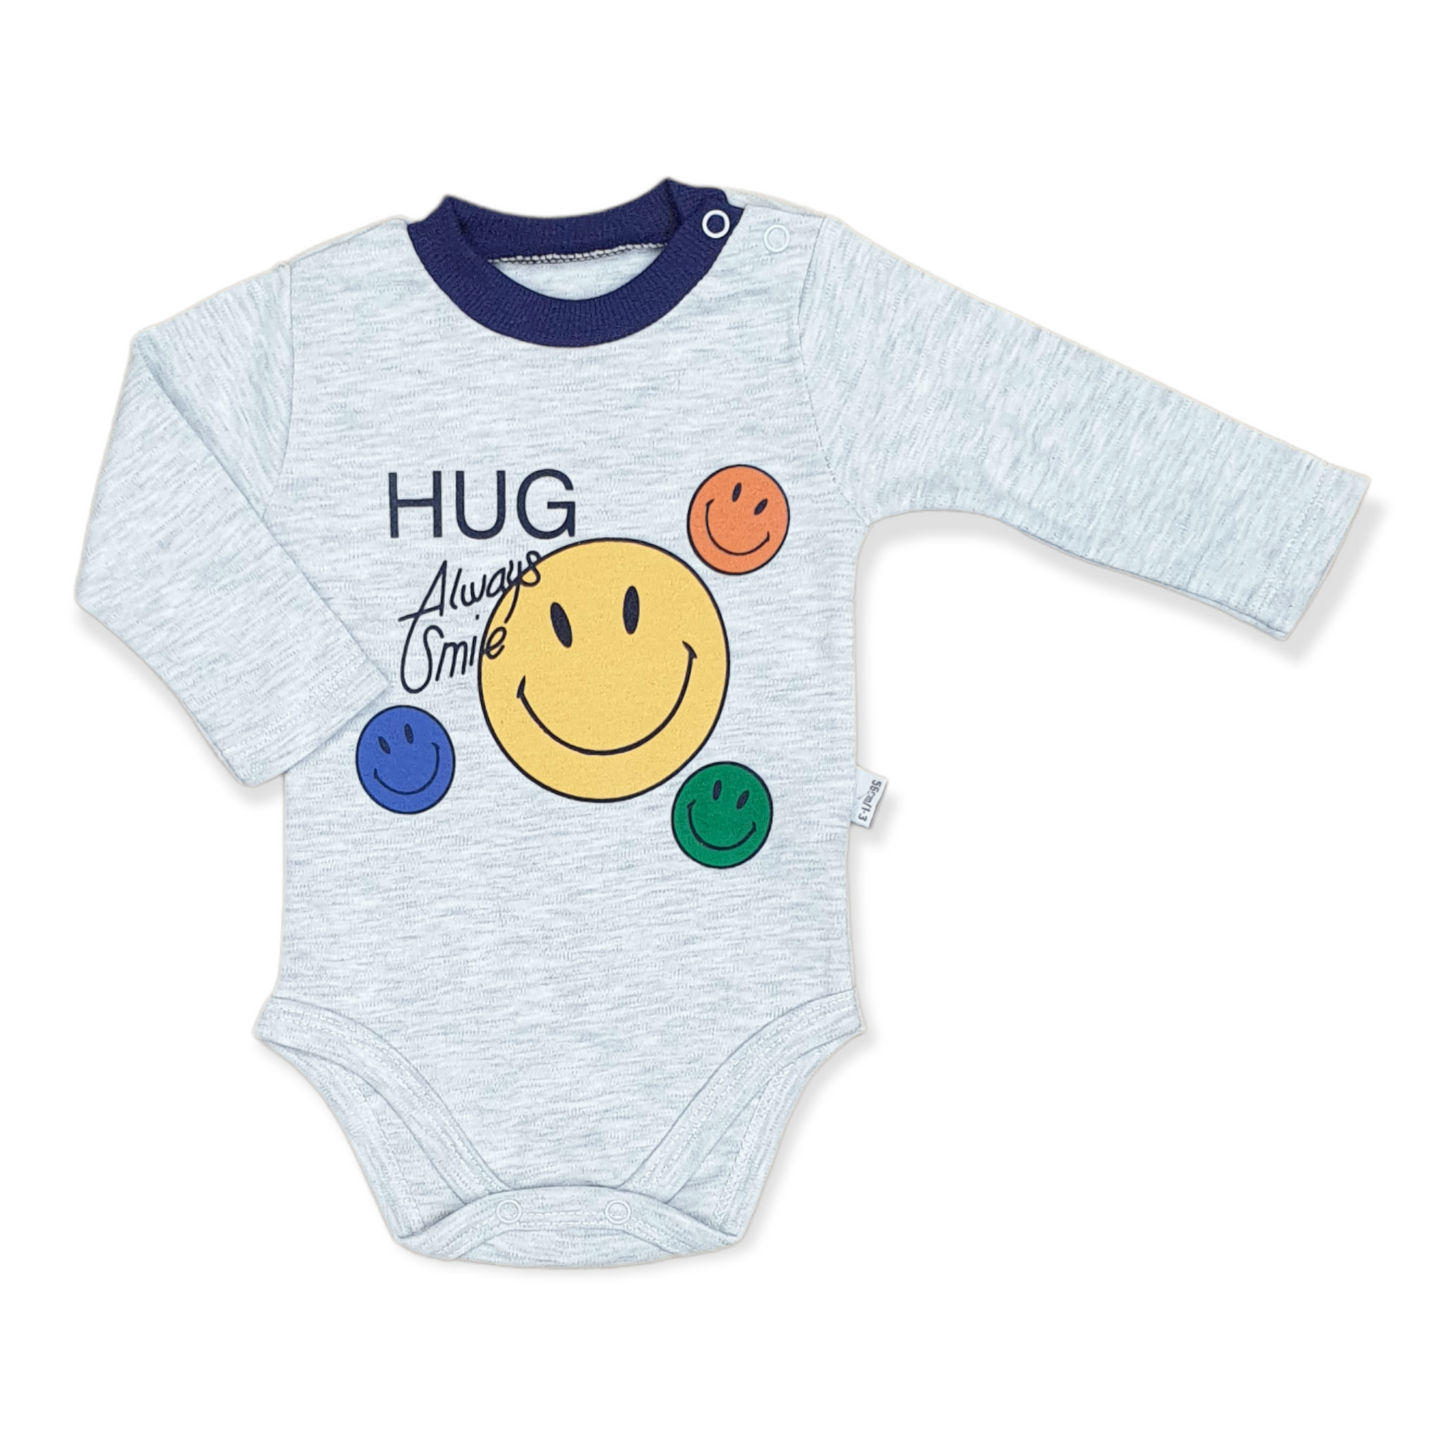 Puanbaby - Long Sleeve Always Smile Baby Boy Body